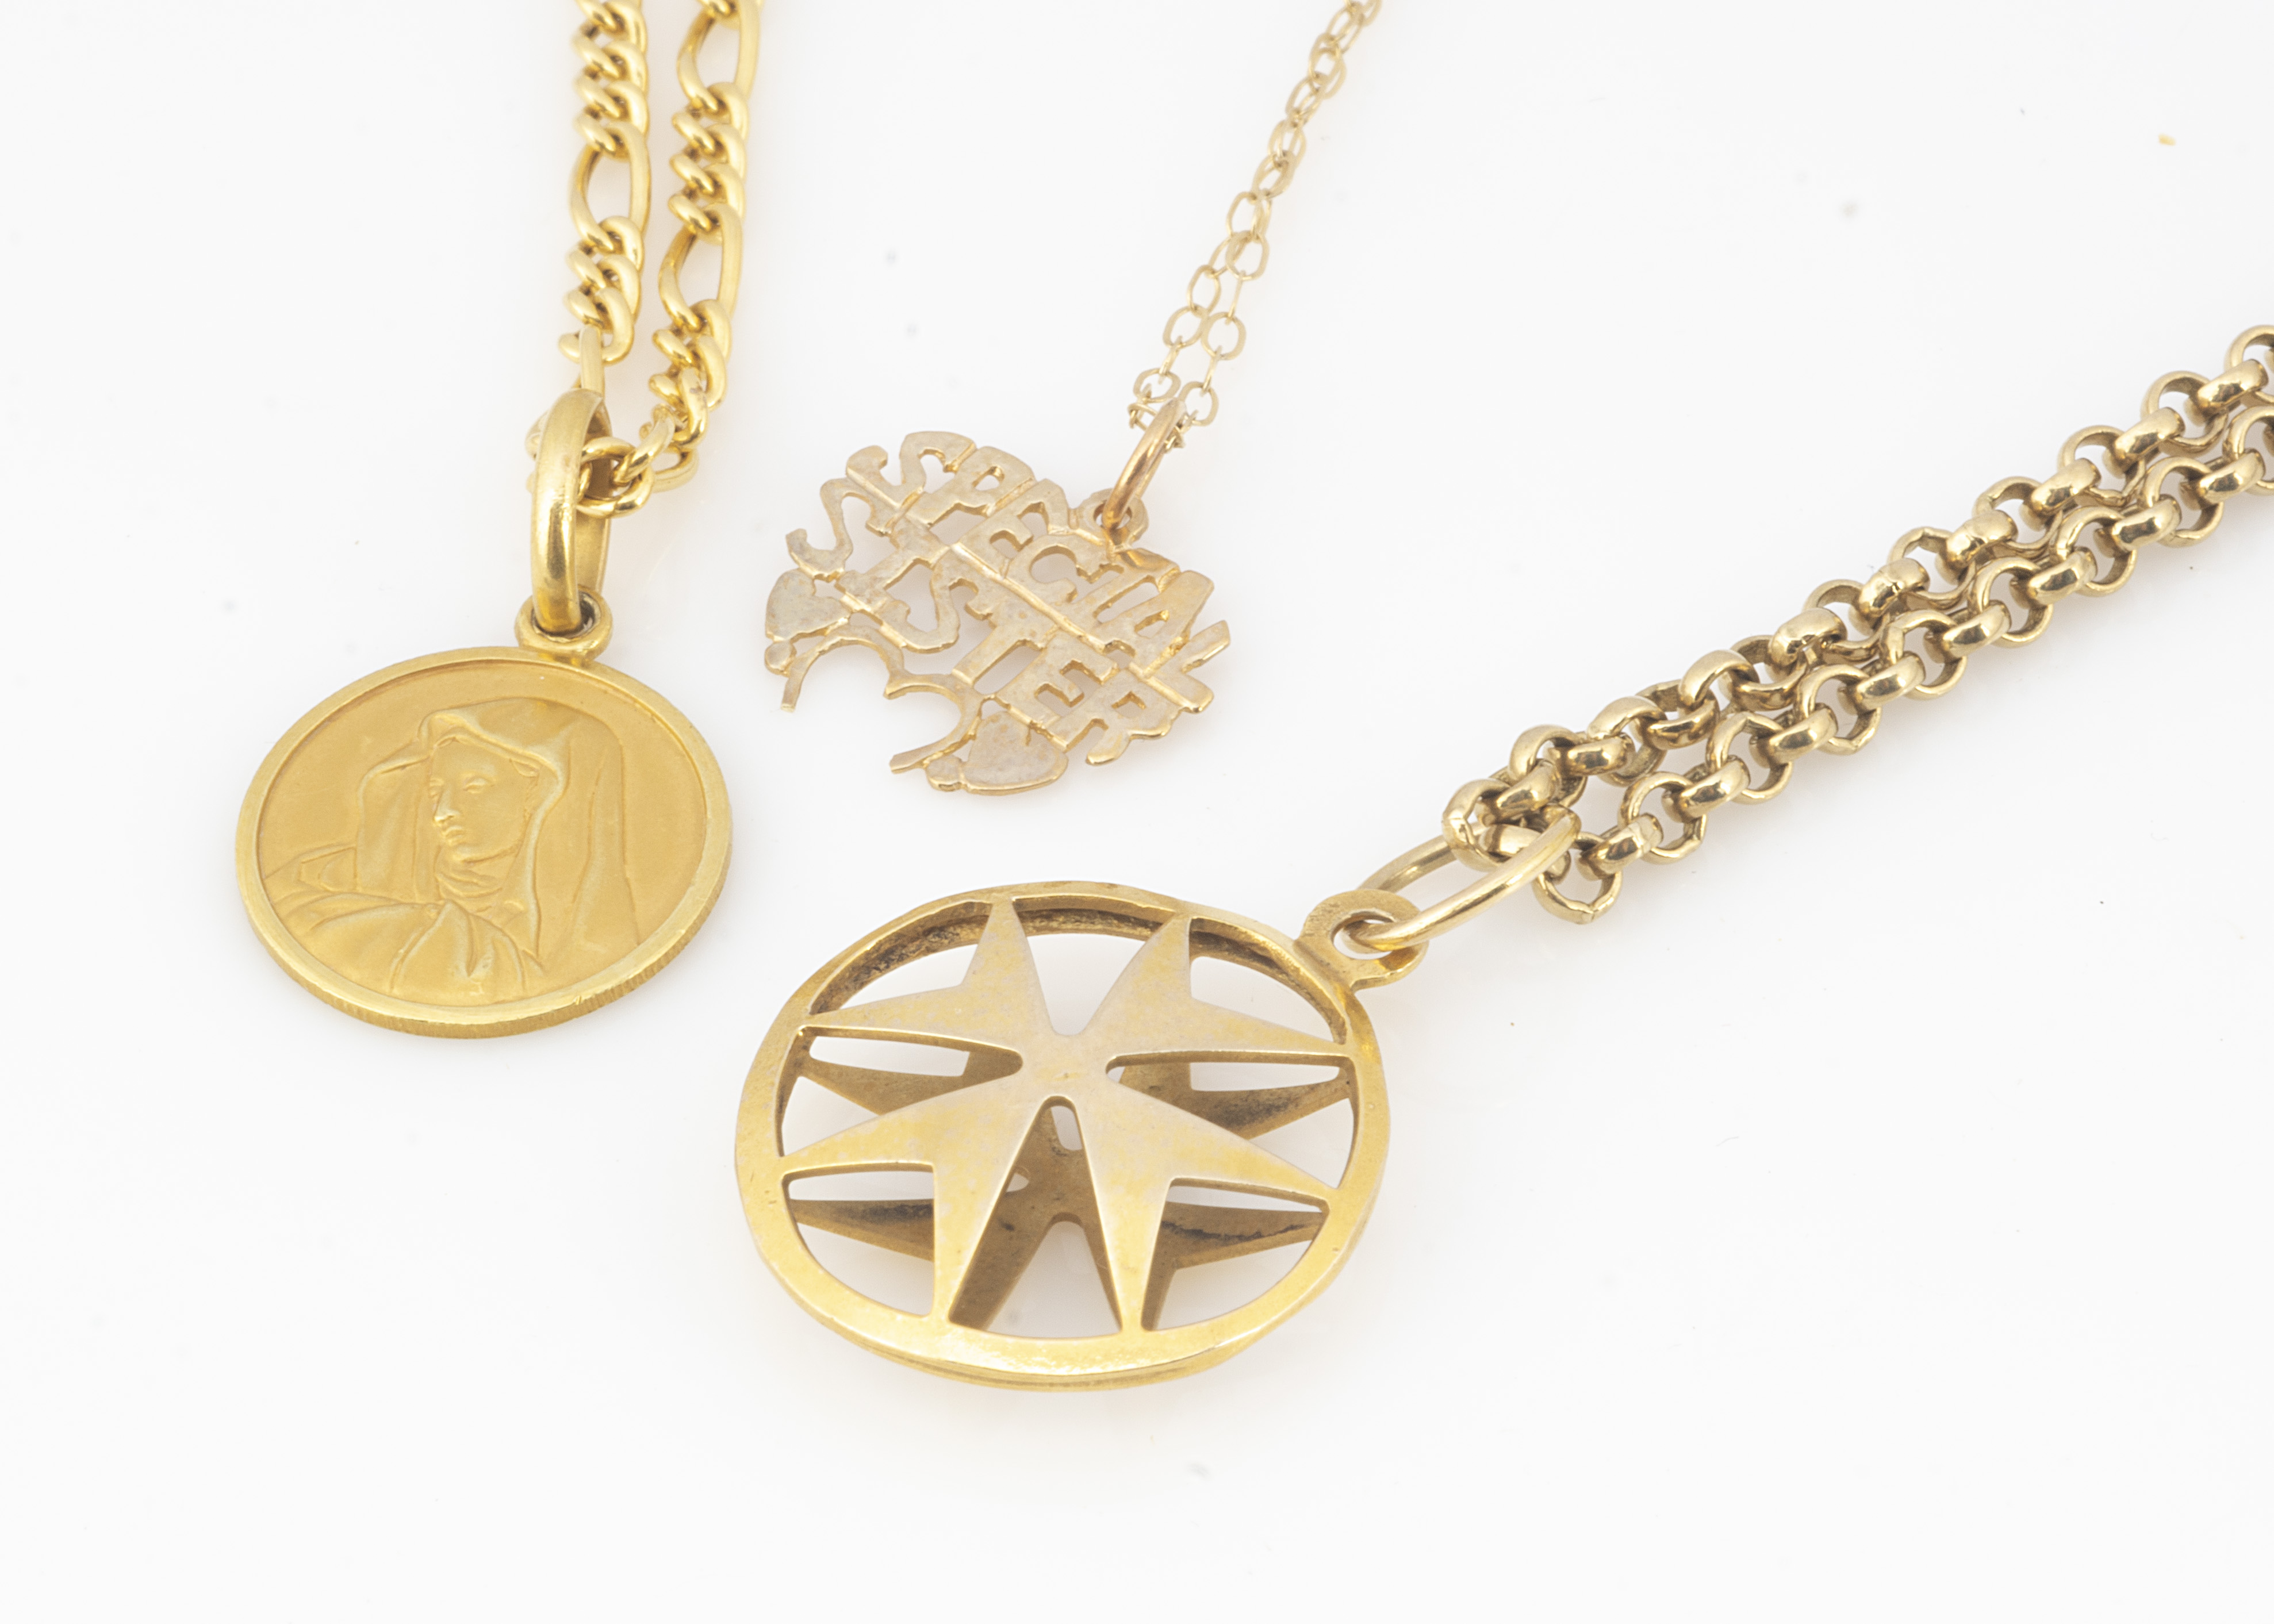 An 18ct gold Madonna pendant, 2g, on a 9ct gold chain, a 9ct gold Maltese cross on gold chain and